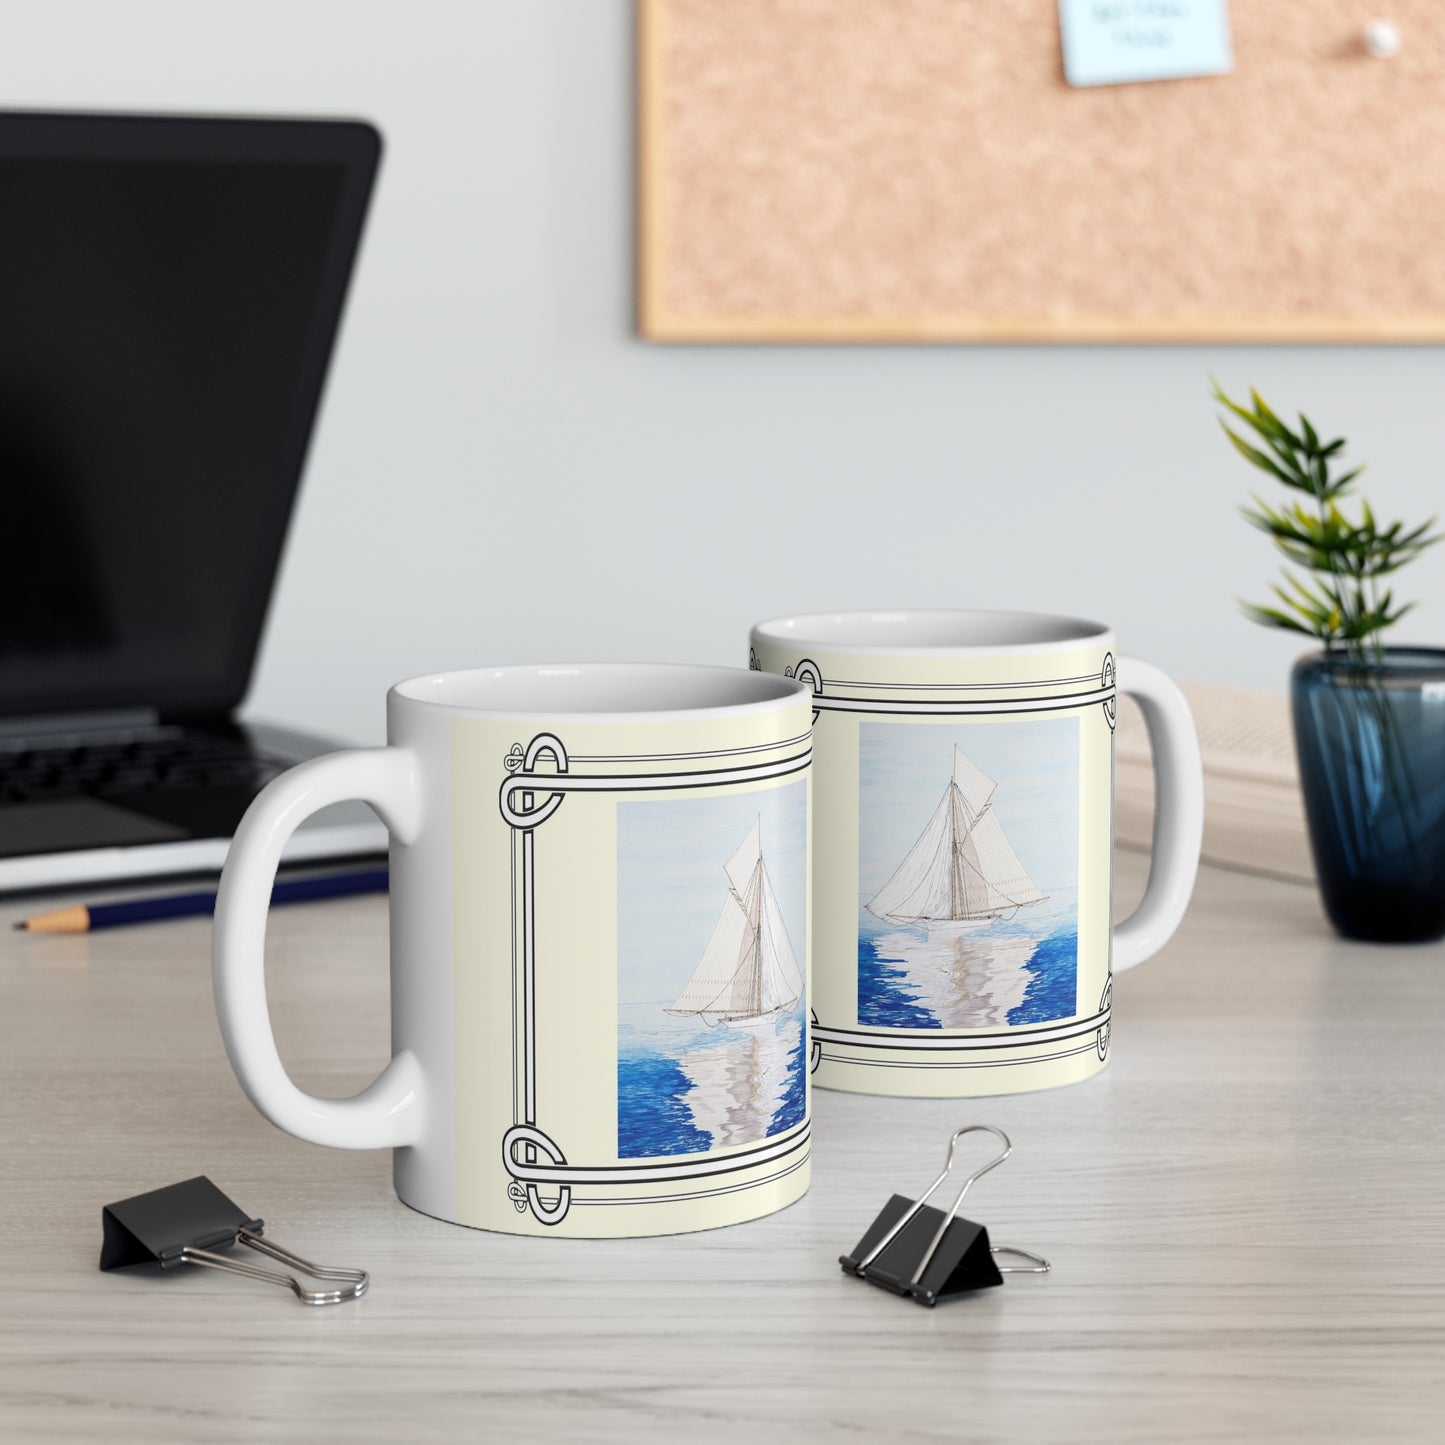 Enjoy a pair of the Becalmed 11 oz. Mugs when your work together on a project.